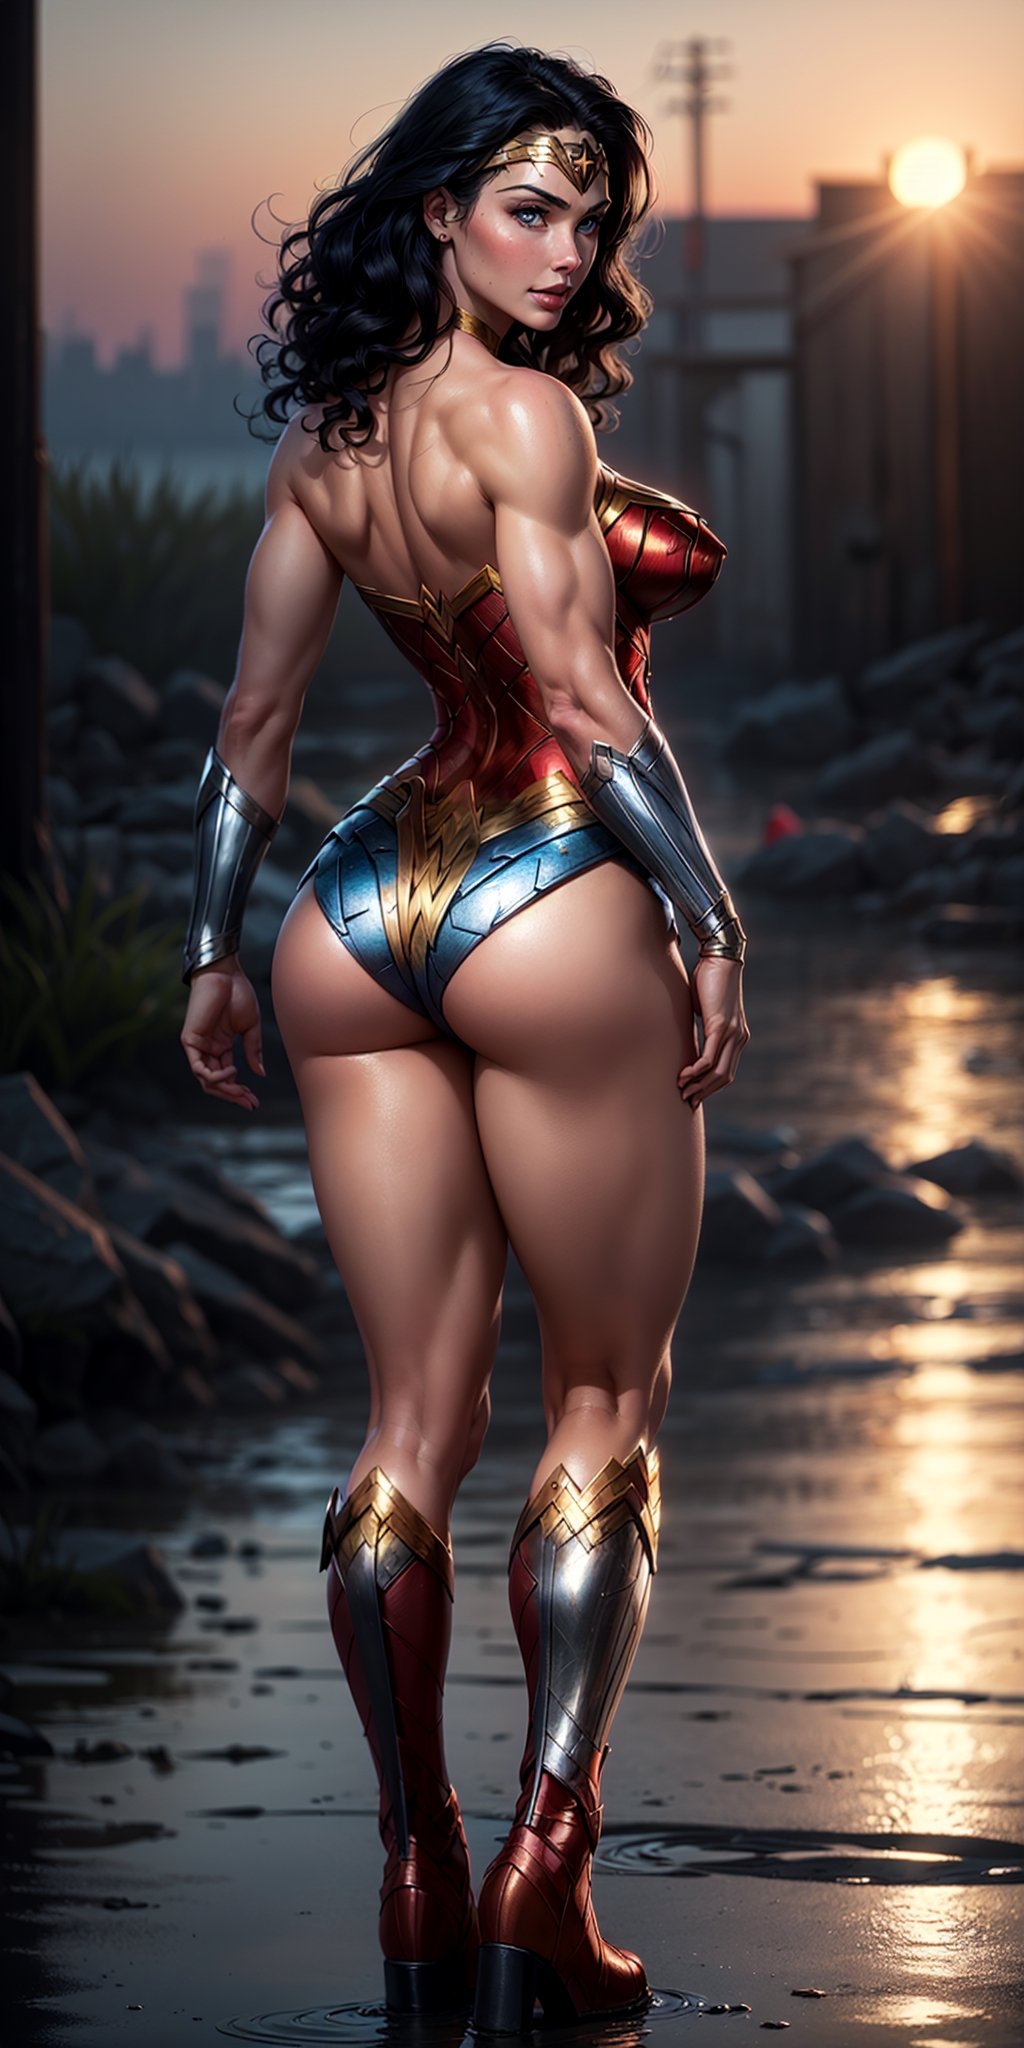 1woman, Wonder Woman, (((floating in the air))),((full body)), ((sunset behind her)),(intricate details, makeup), (delicate and beautiful delicate face, delicate and beautiful delicate eyes, perfectly proportioned face), delicate skin, strong and realistic blue eyes, realistic black hair, lips, makeup, natural skin texture, tiara, jewelry, (star), \(symbol\),(((leotard))), (((wonder woman uniform))), gauntlet, red boots, golden girdle, (public clothing: 1.5), bare shoulders, slightly sunburned complexion, mature, sexy, toned muscles, (muscles:1.2), ((view from behind)), ((strong and healthy body)), ((((more) muscles))), long legs, curves, (big breasts: 1.3), thin waist, soft waist, (delicate skin), (beautiful and sexy woman), (swollen lips: 0.9), very delicate muscles, standing,(realistic: 1.5), photorealistic, octane rendering, hyperrealistic, tight modeling, (photorealistic face: 1.2), thick eyelashes, long eyelashes, (curly dark hair: 1.1), best quality, half smile, (looking at the viewer), sharp focus, (4k), (masterpiece), (best quality), fantasy, extremely detailed, intricate, hyper detailed, (perfect face), illustration, soft lighting,(specular lighting:1.4), blue eyes, absurdly photorealistic, ultra high resolution, intricate, hyperdetailed, (skindentation), female, detailed body, (detailed face: 1.1), (outlined iris), (hydrocolor lenses), (perfect eyes), 4k, gorgeous, (masterpiece: 1.2), (best quality:1.2),